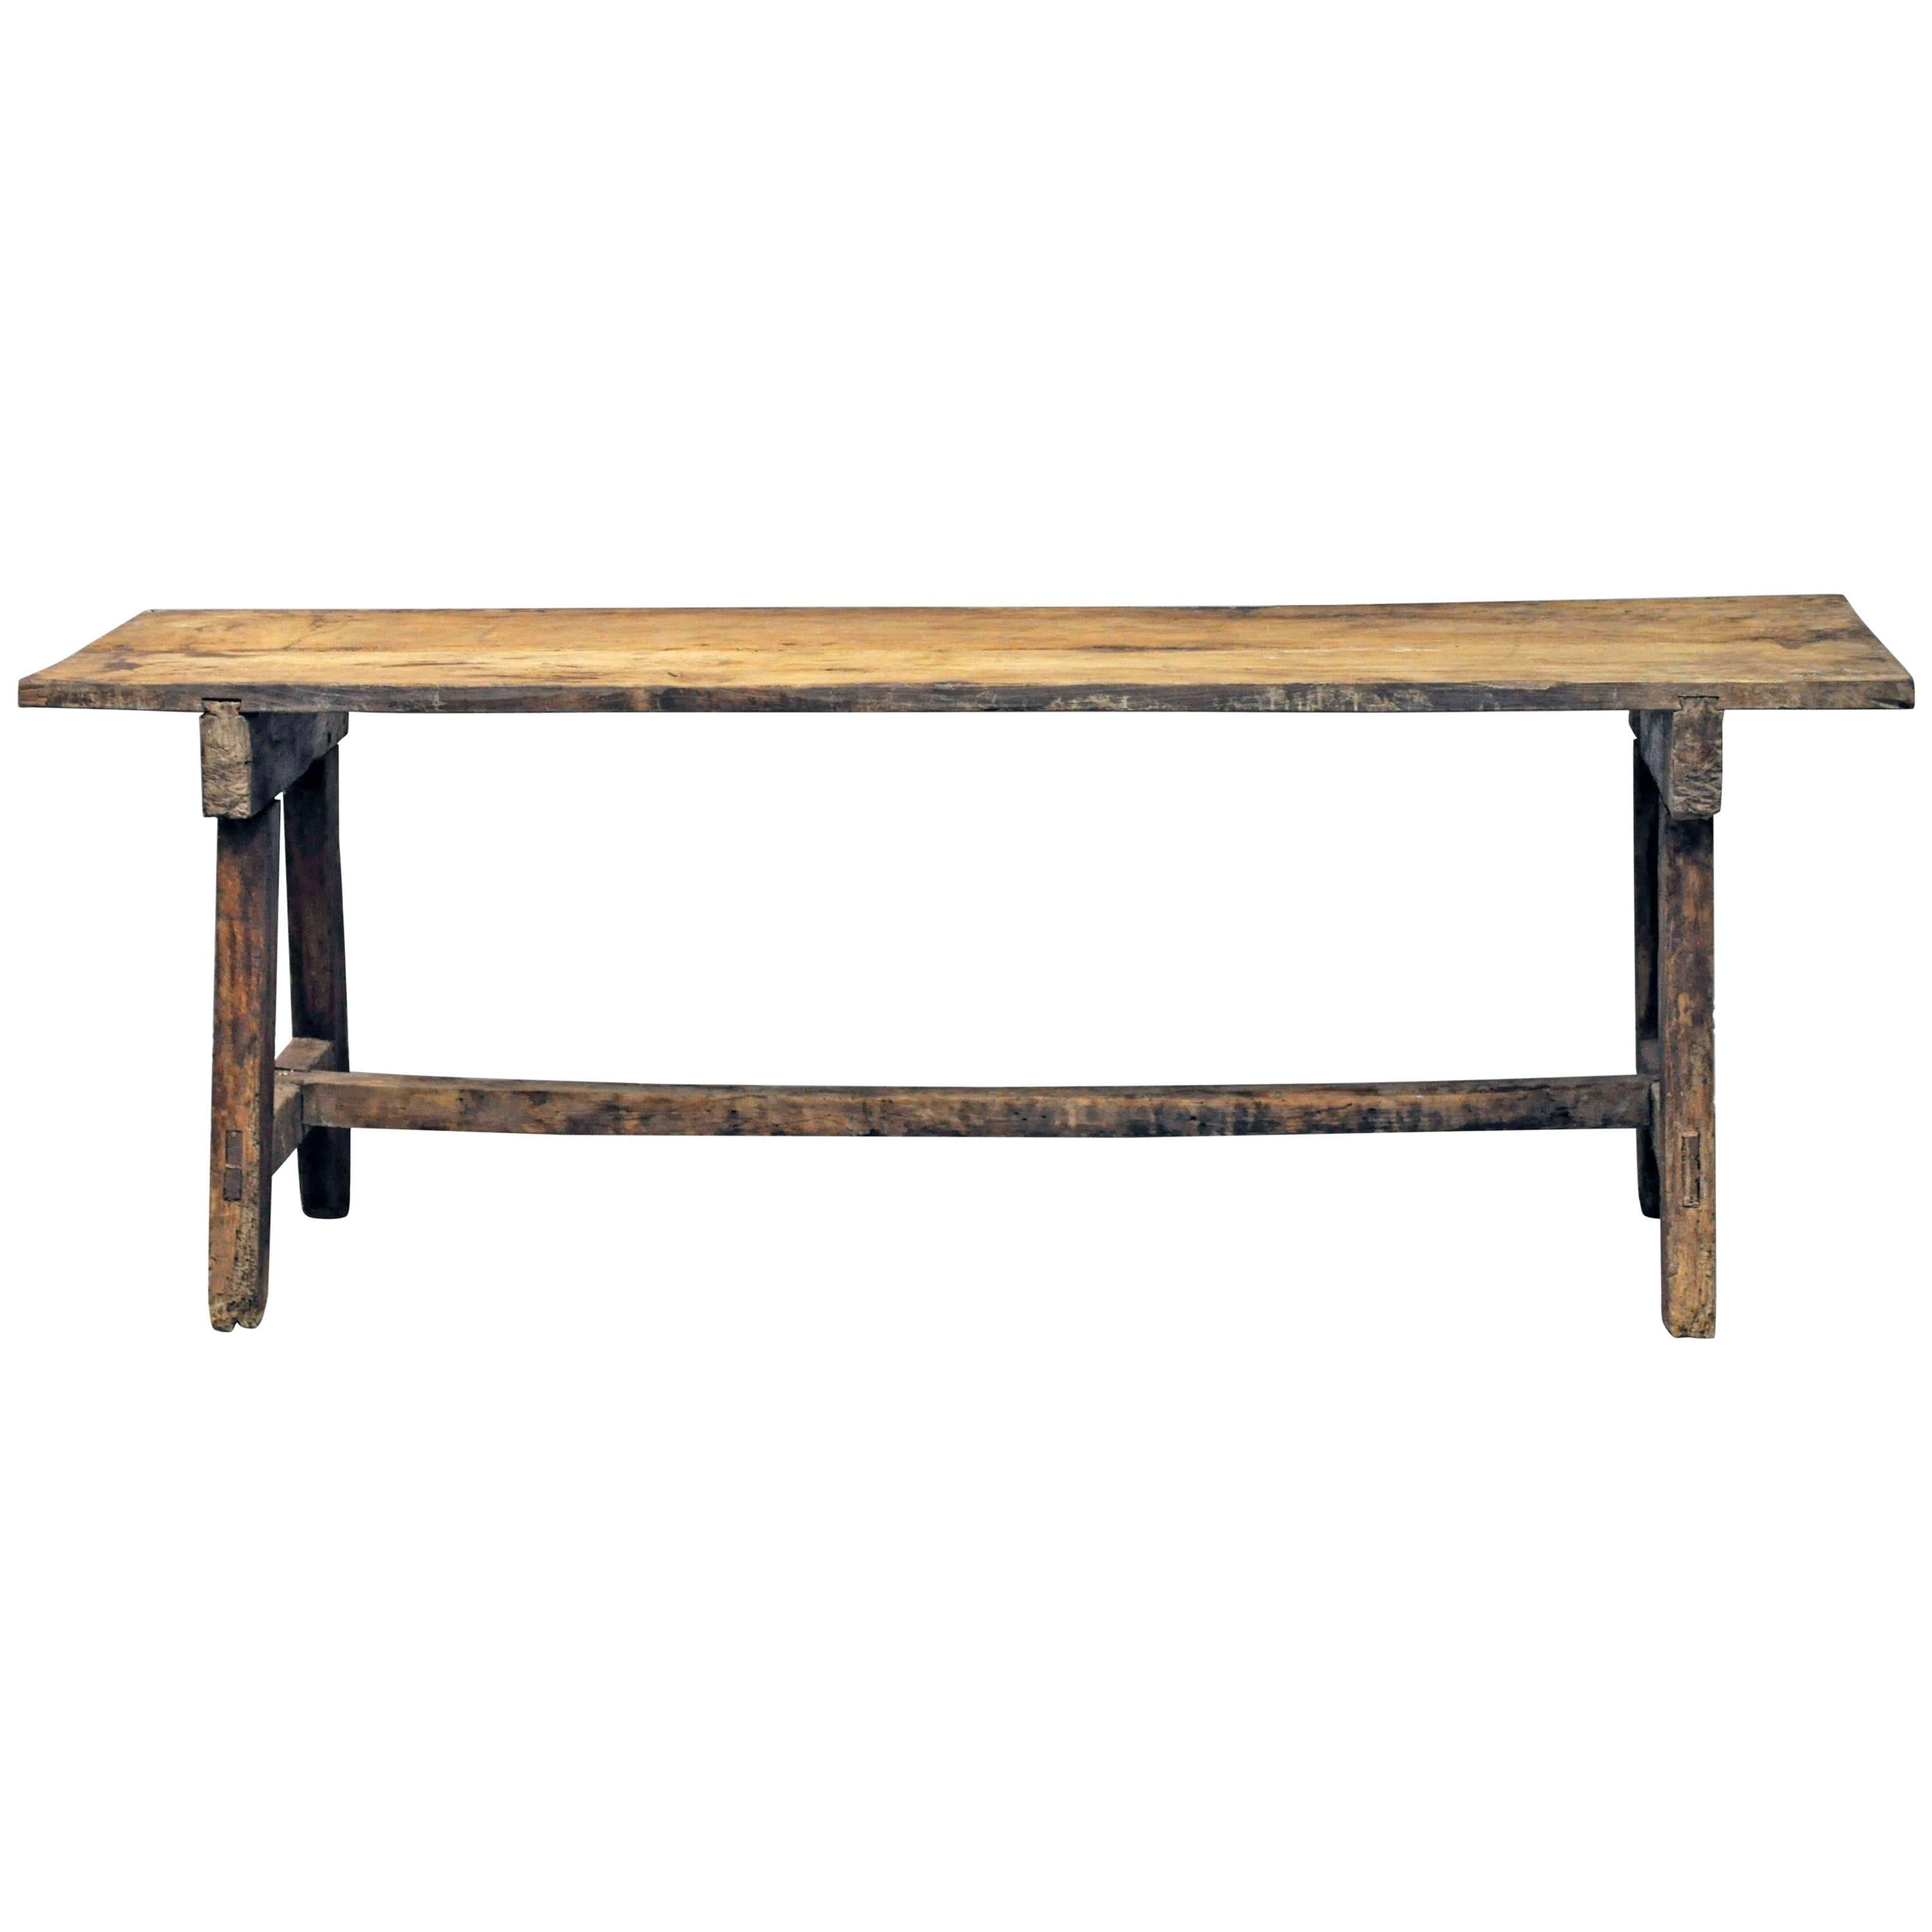 Early rustic Spanish style table, mortise construction and hard-wood; possibly chestnut or clear oak. 

Established in 1979, Joyce Horn Antiques, ltd. continues its 36 year tradition of being a family owned and operated business specializing in